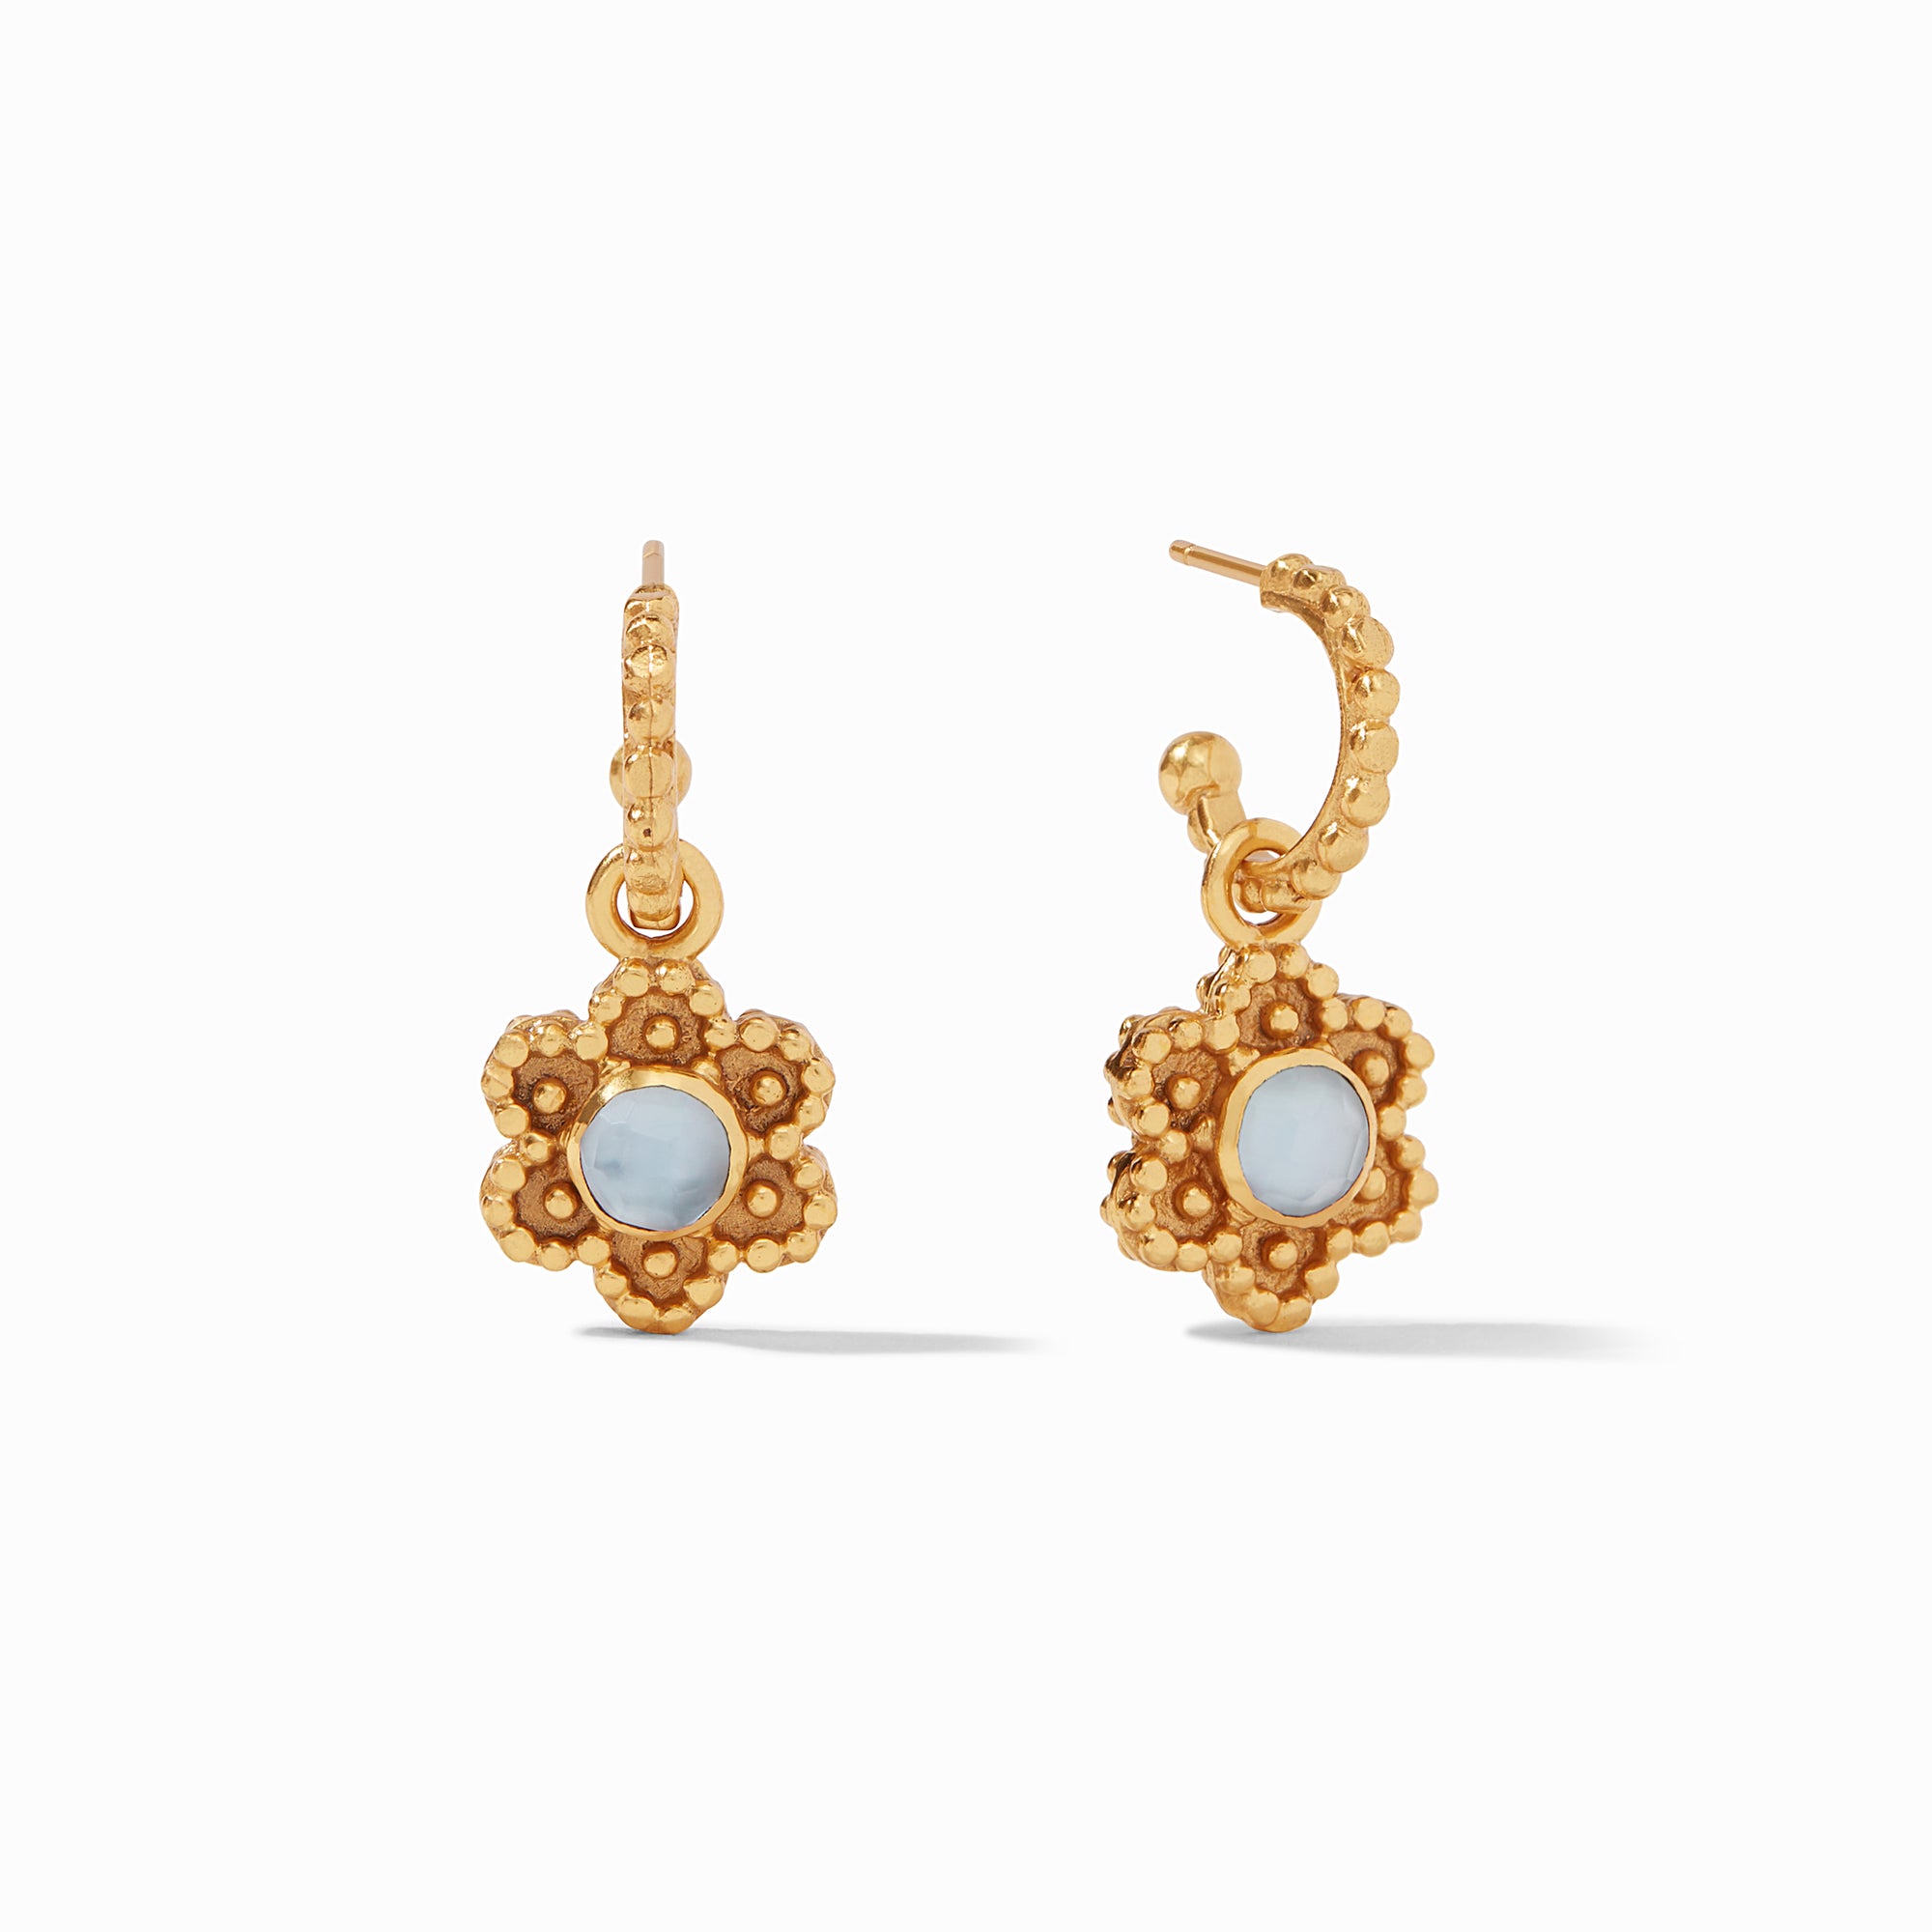 Julie Vos - Colette Hoop &amp; Charm Earring, Iridescent Chalcedony Blue